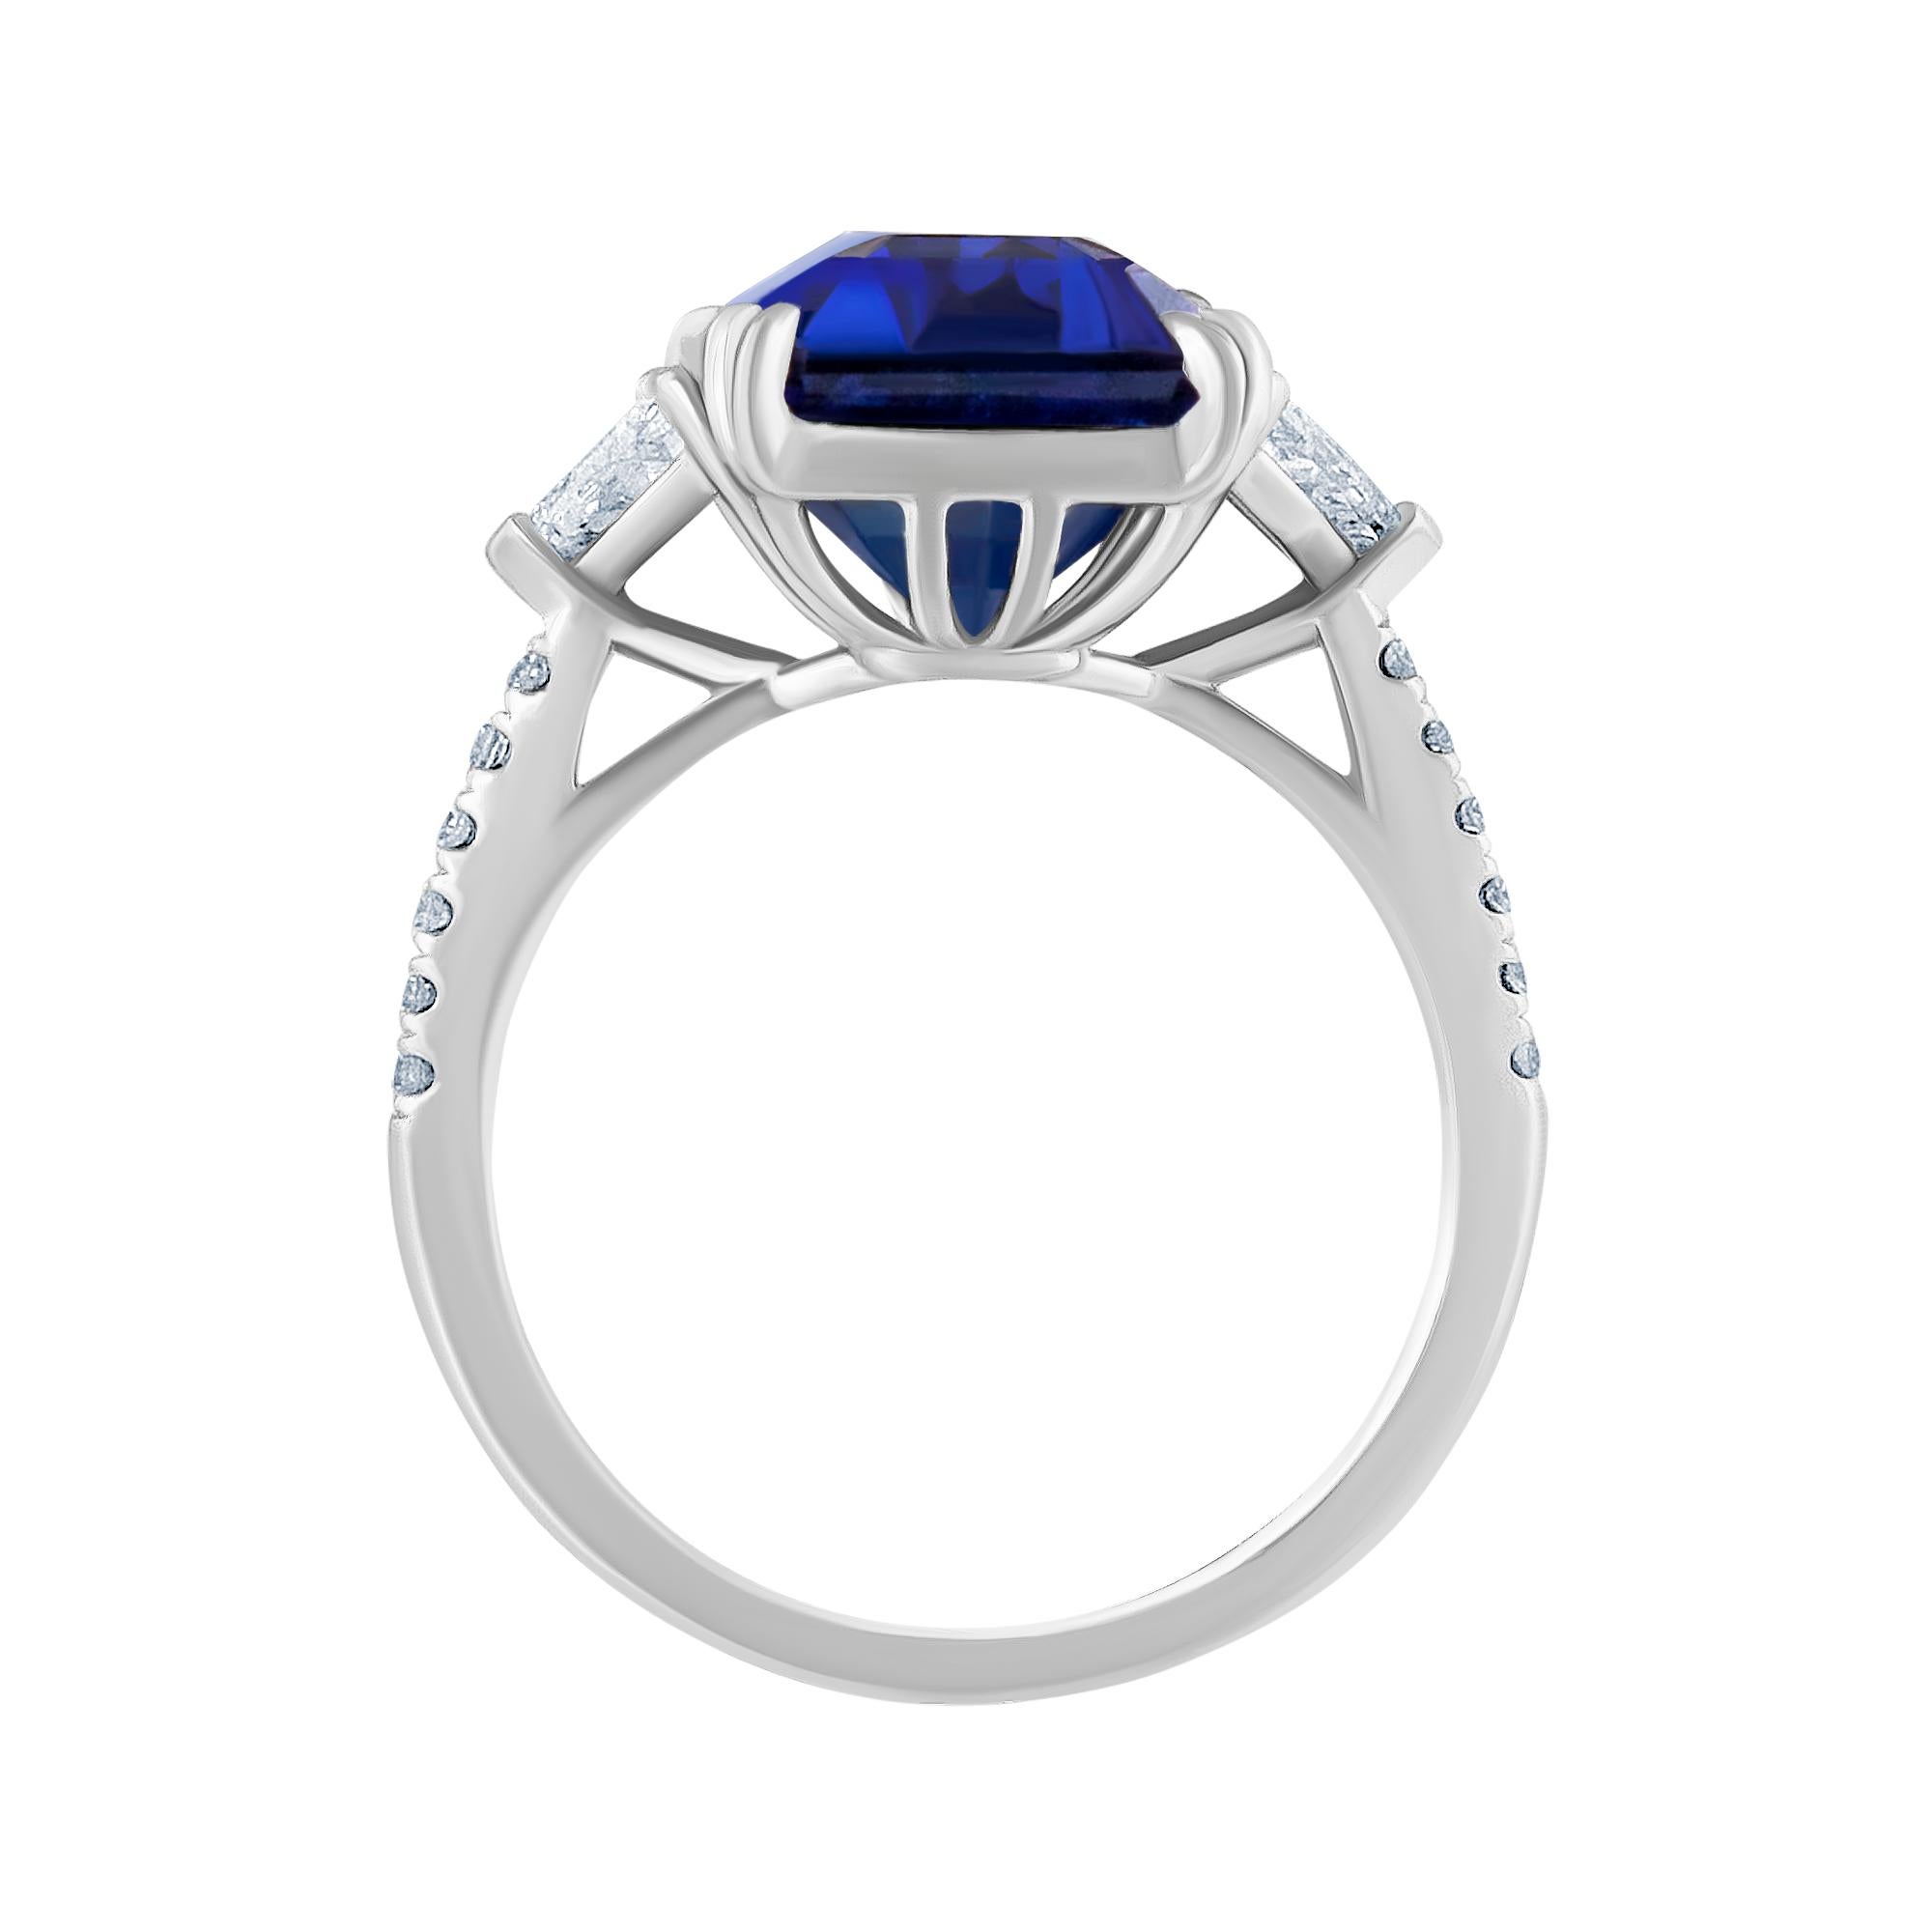 Emilio Jewelry Certified 10.35 Carat Emerald Cut Sapphire Diamond Ring 
This amazing ring is unique and well thought out before Emilio designed it! Most women today want a ring that is striking, yet humble enough to wear to perform everyday errands.